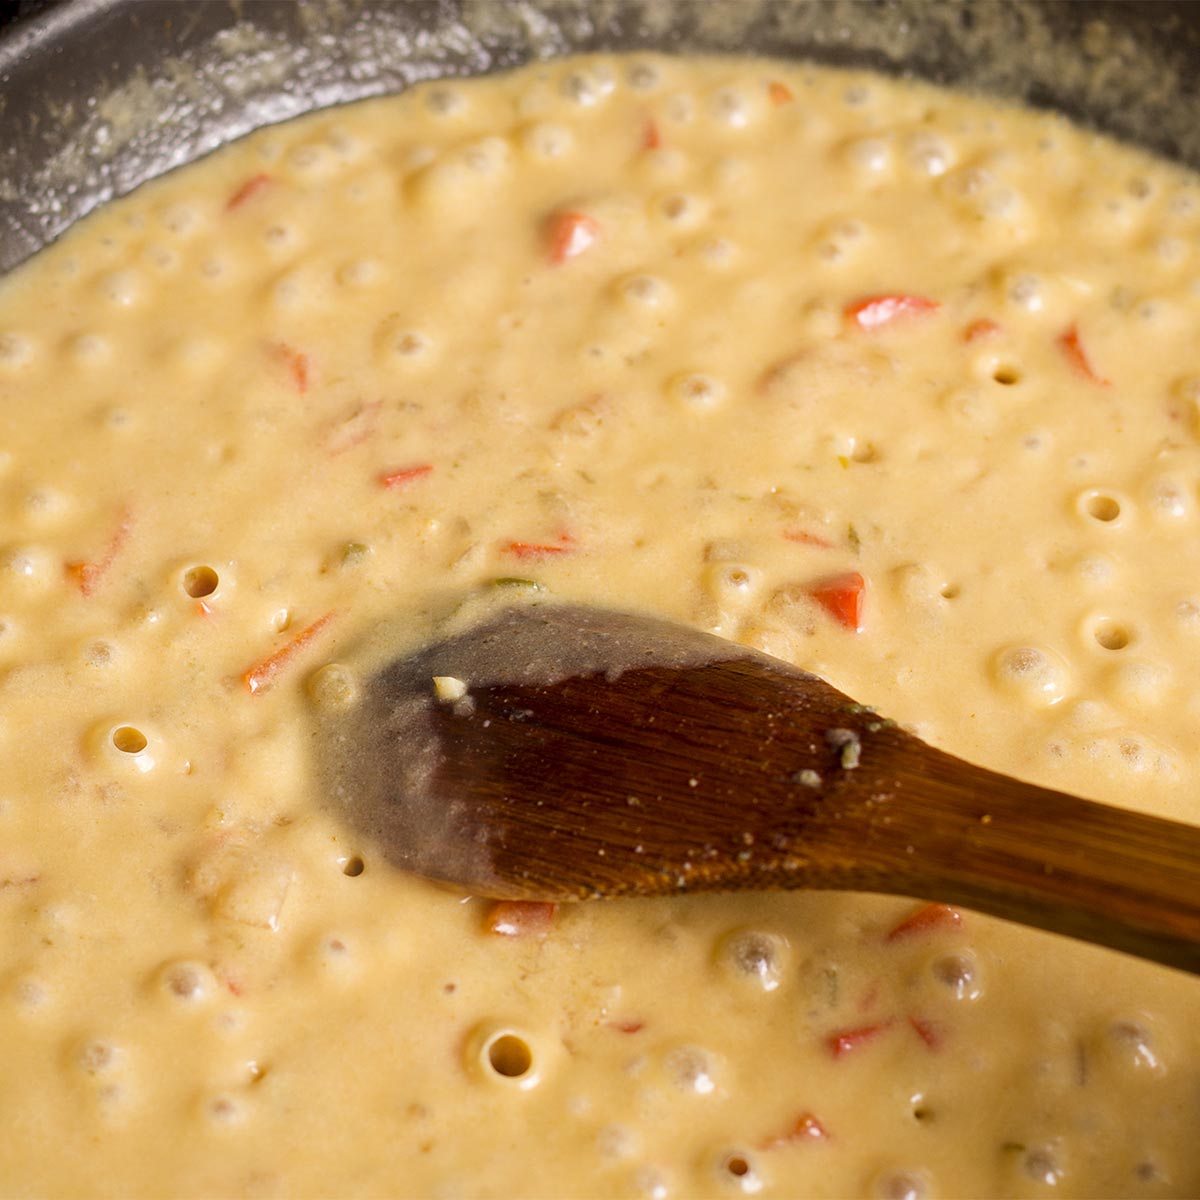 Using a wooden spoon to stir coconut milk and coconut cream into the sauce.